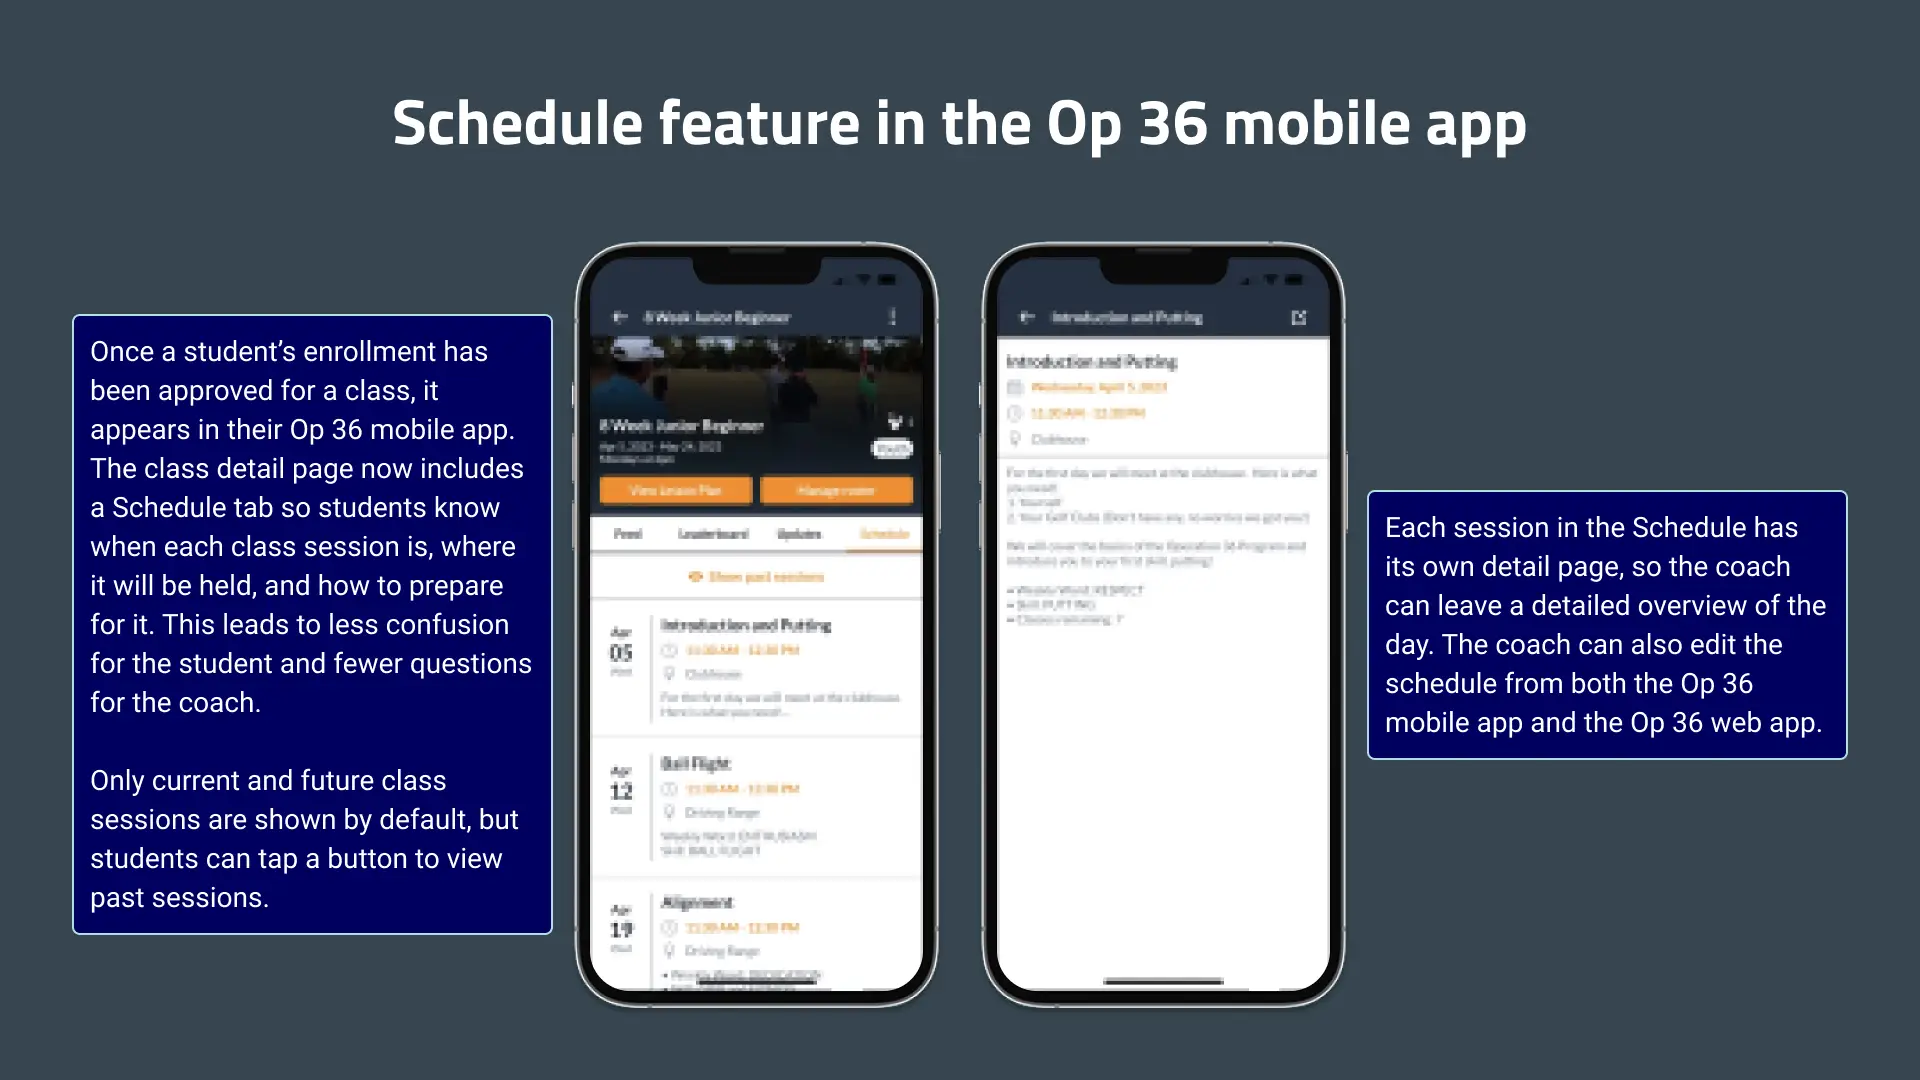 New Schedule feature in the Op 36 mobile app.